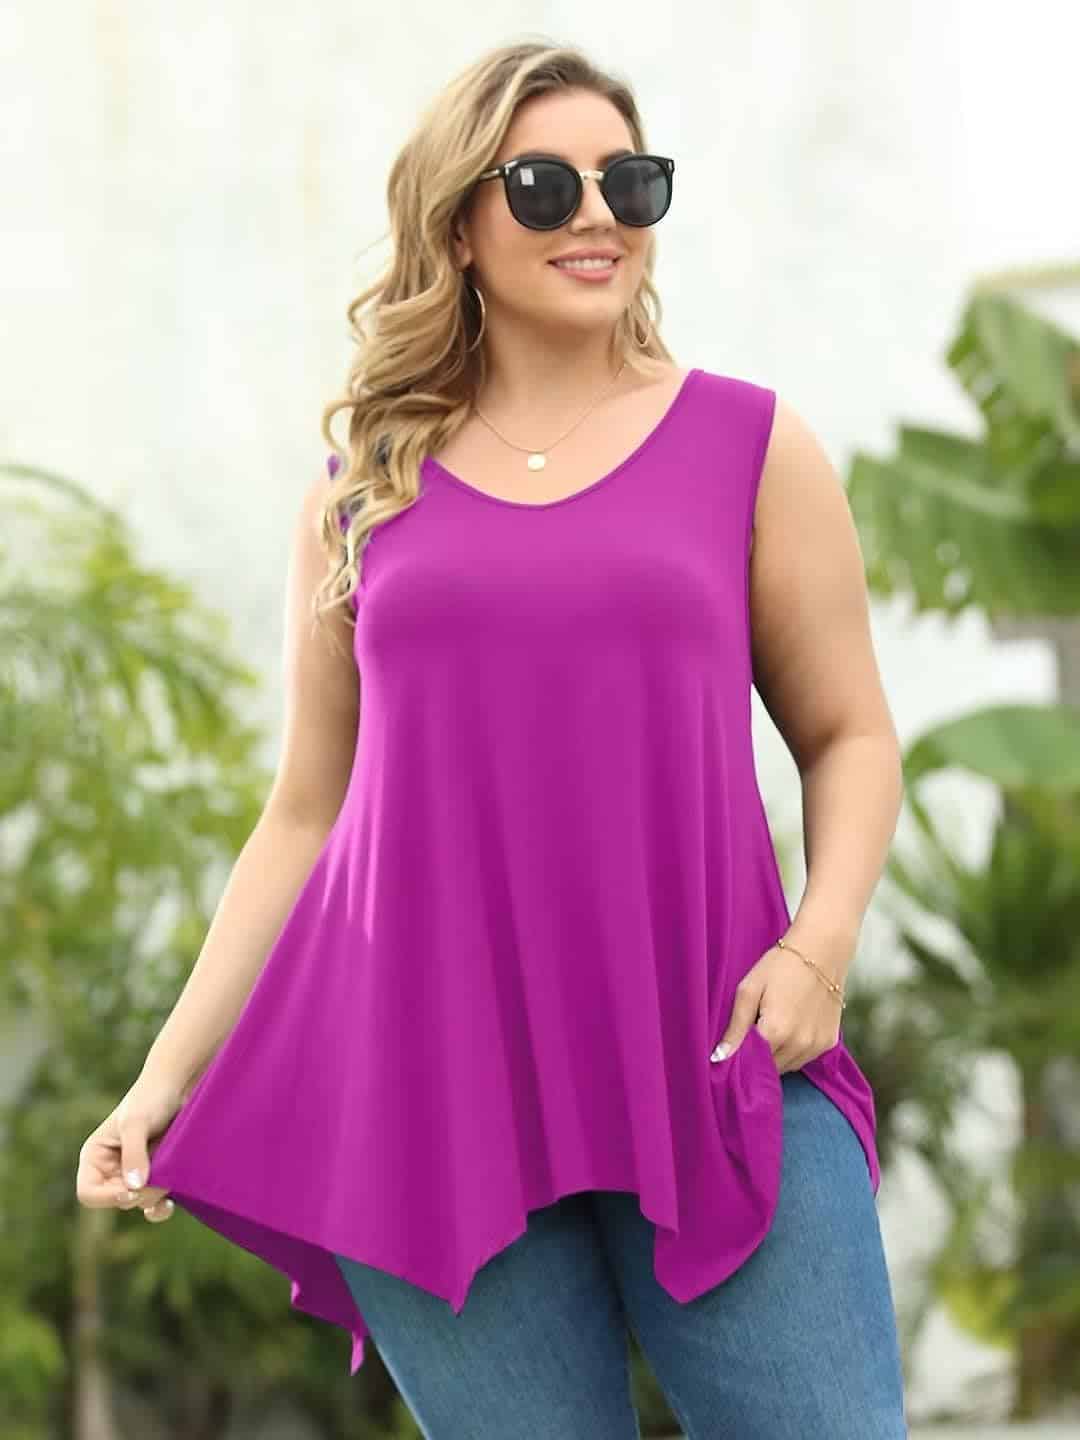 LARACE Sleeveless Tops for Womens V Neck T Shirts: The Perfect Summer Wardrobe Essential